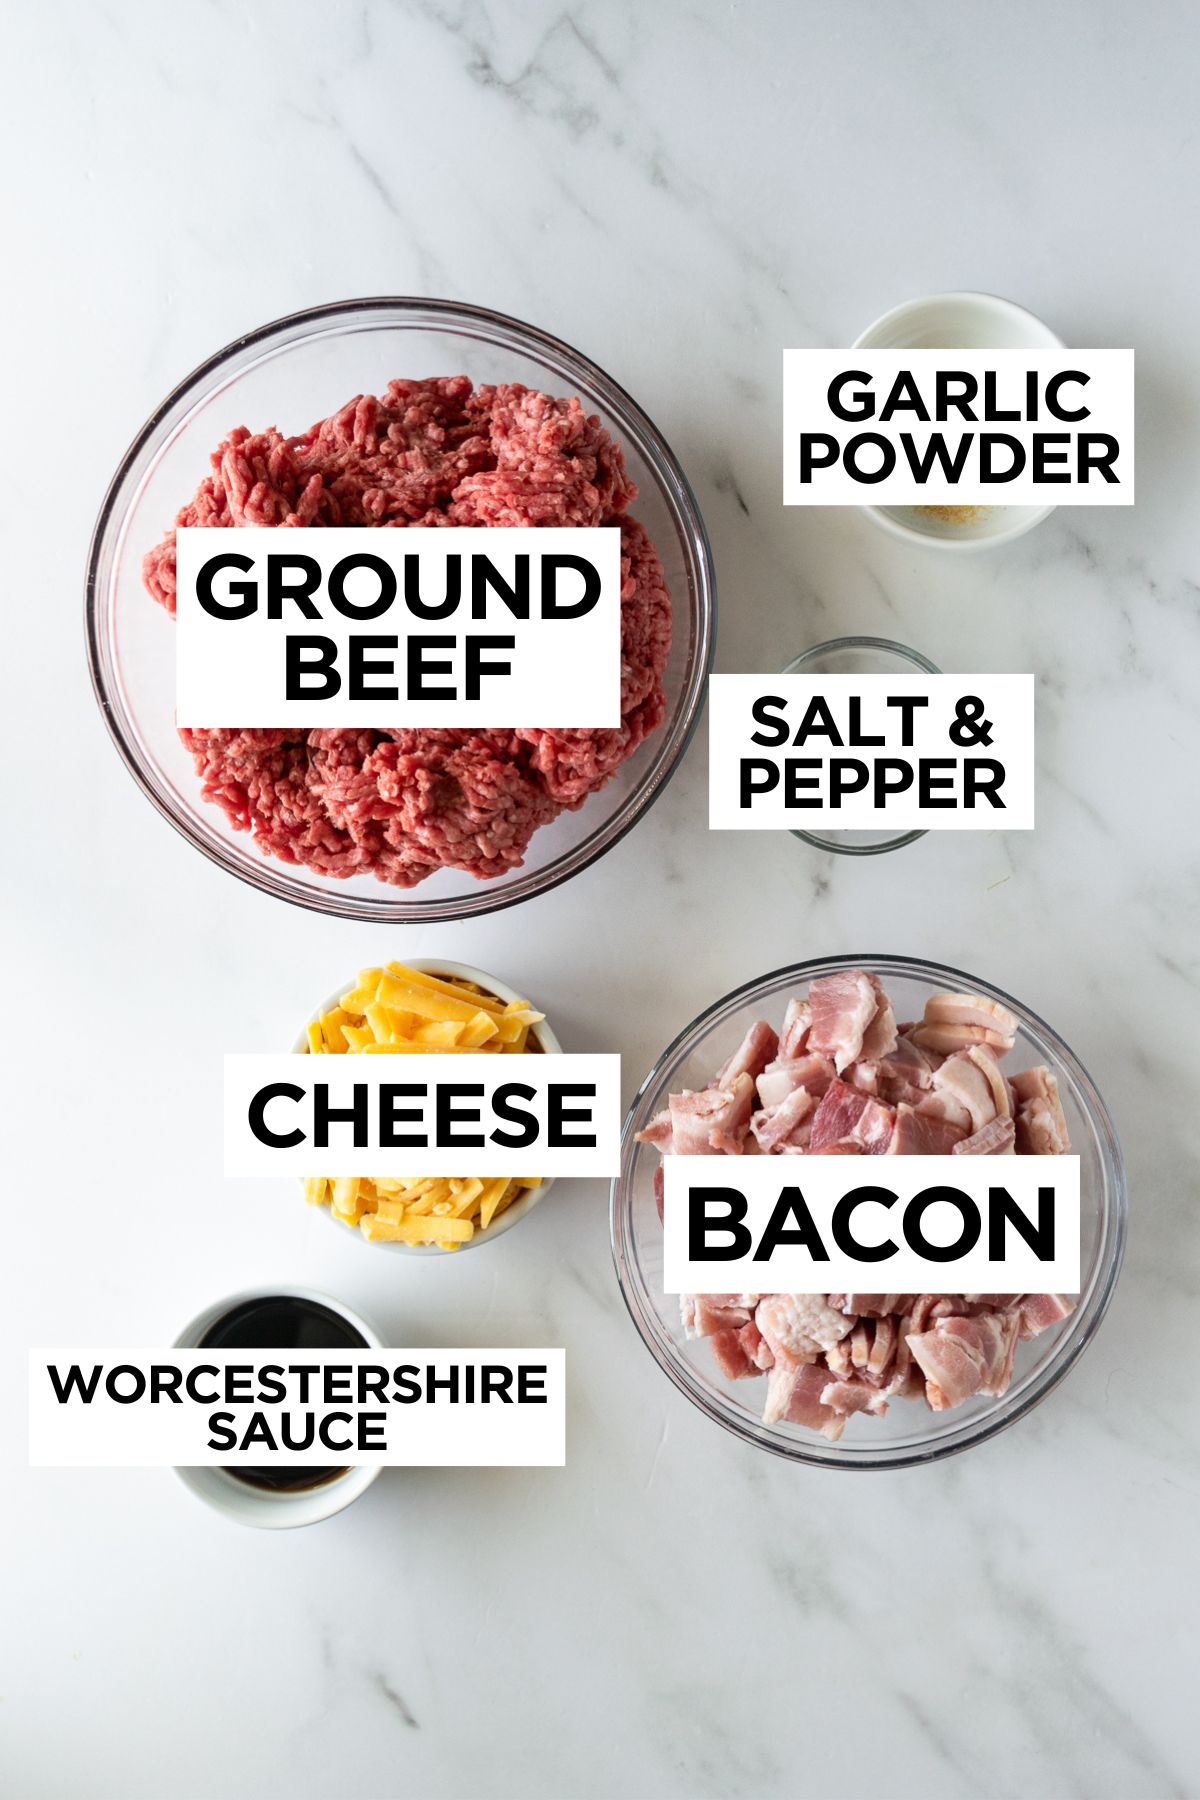 bacon cheeseburger ingredients such as beef, garlic powder, salt, pepper, cheese, bacon and worcestershire sauce.